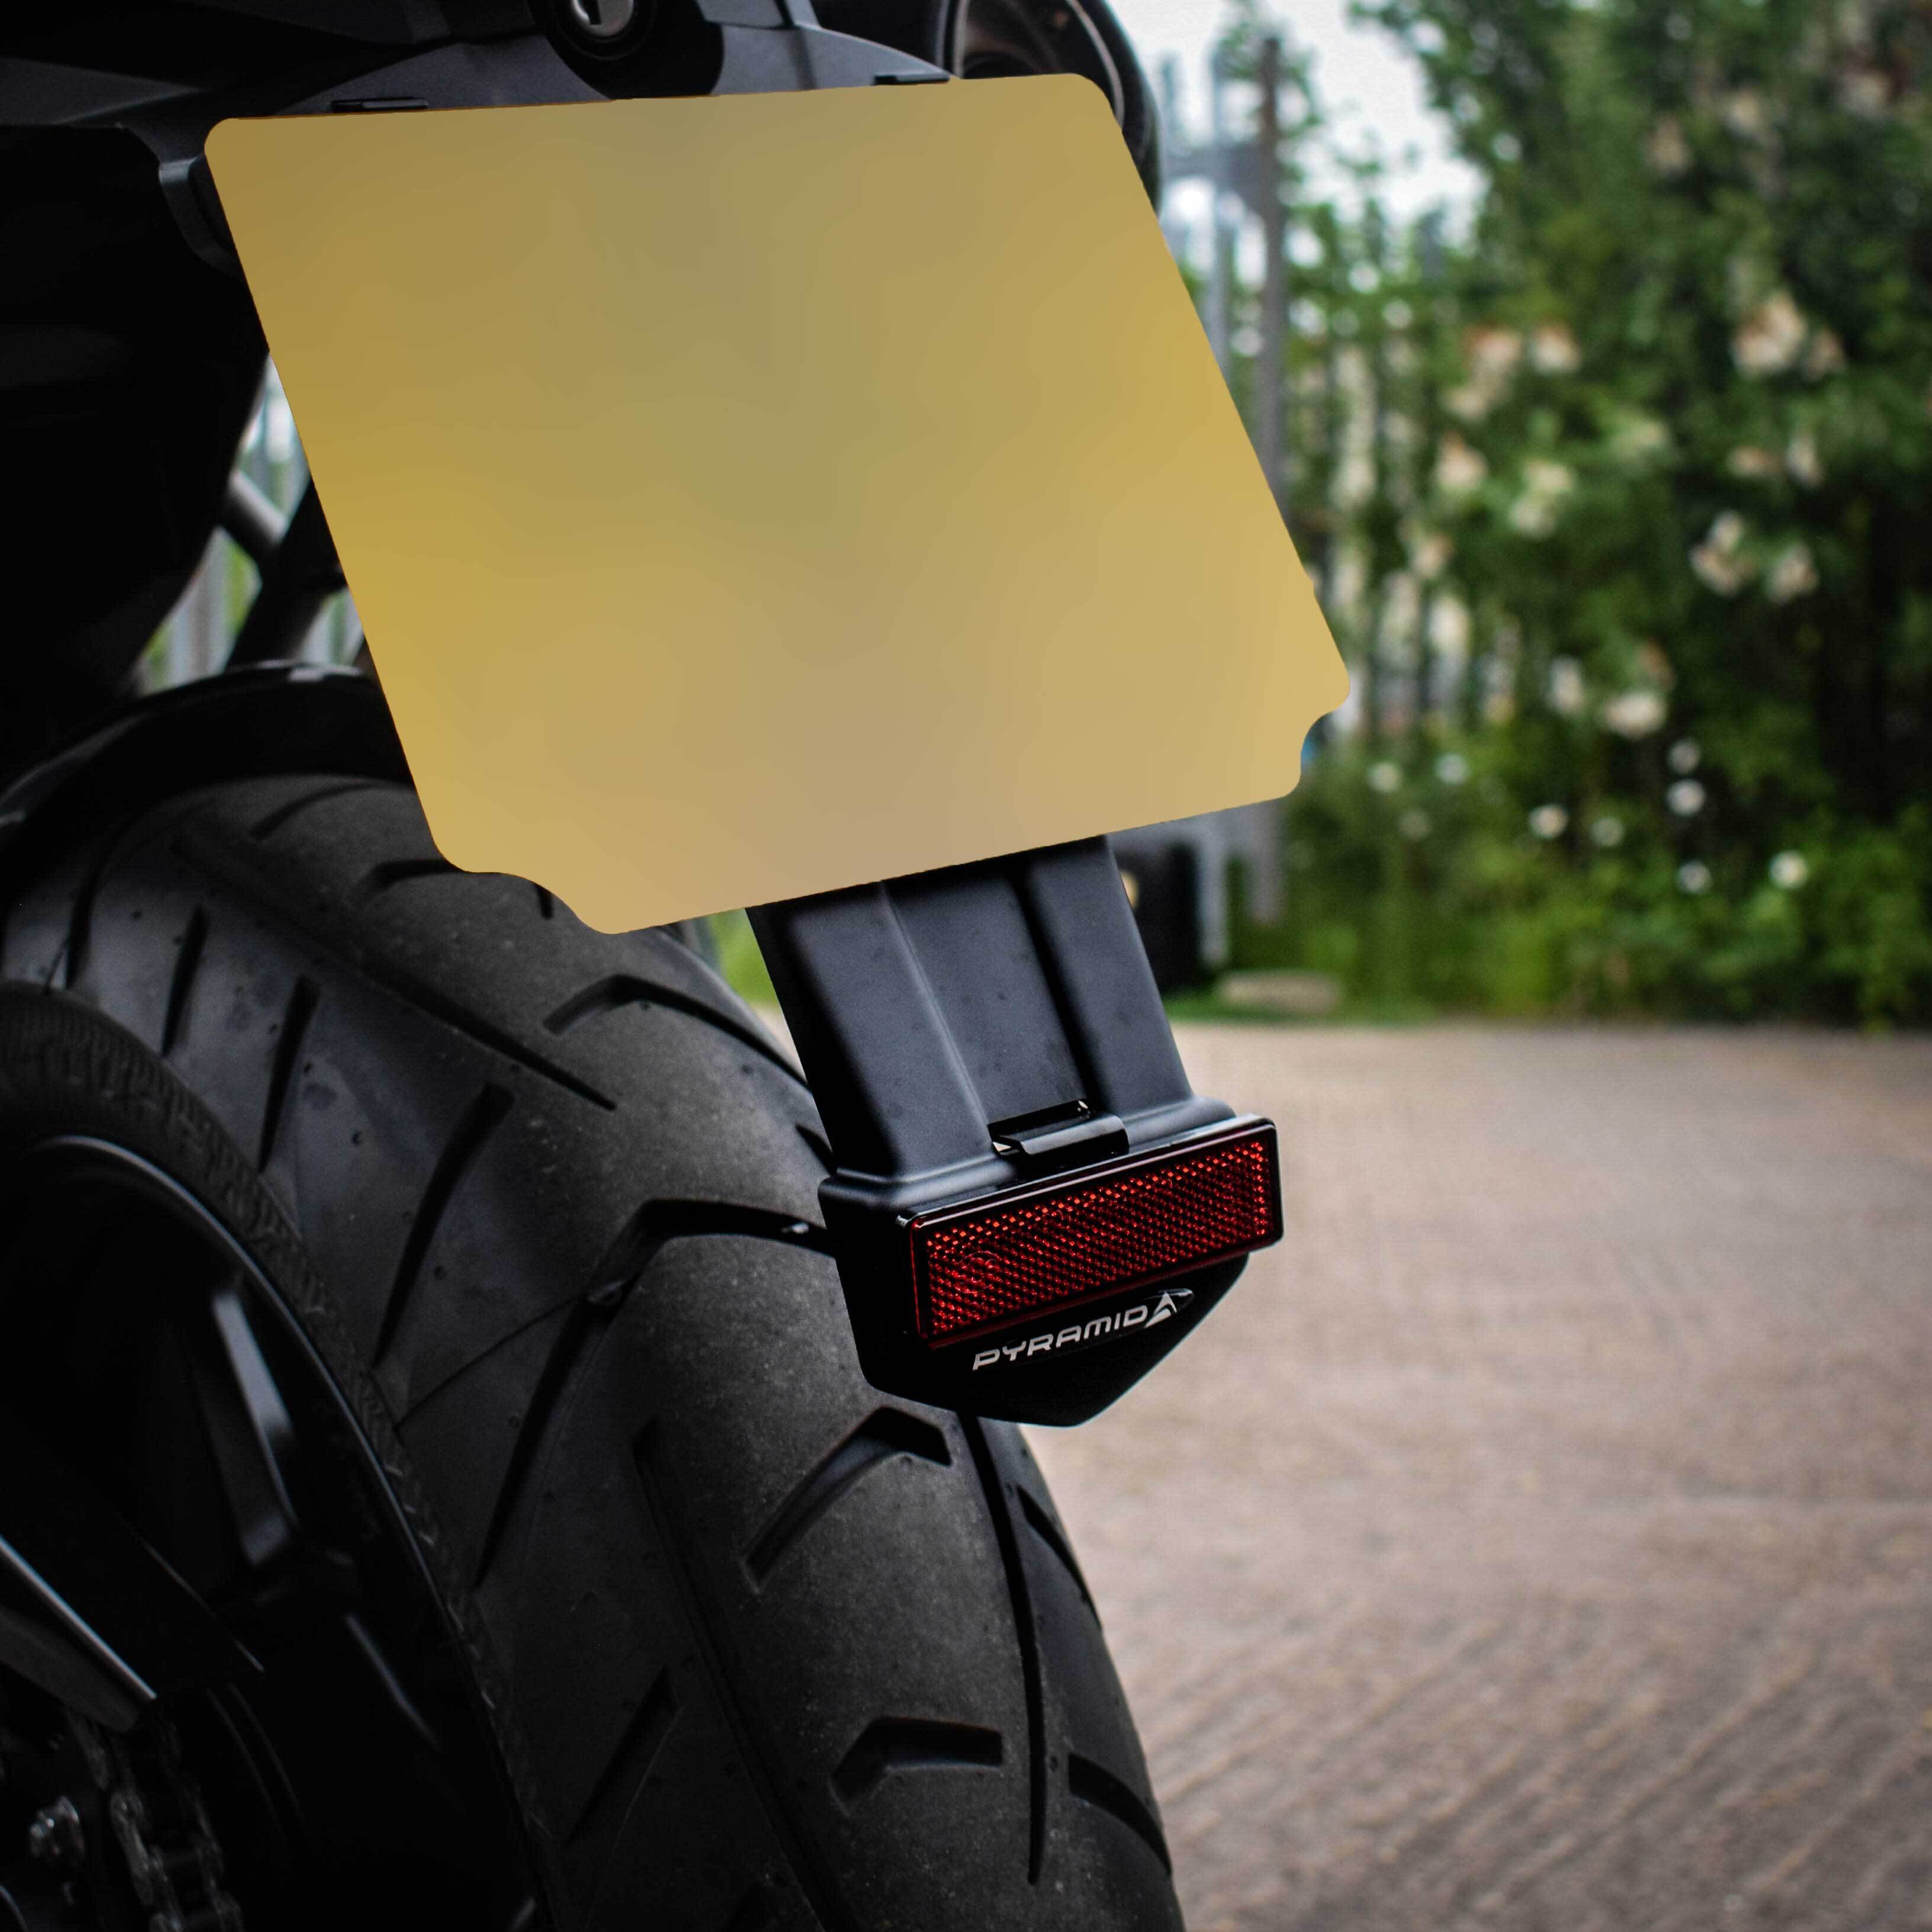 Pyramid Ductail | Matte Black | Triumph Tiger 800 XR/XRT/XRX/Low 2011>Current-08109-Ductails-Pyramid Motorcycle Accessories